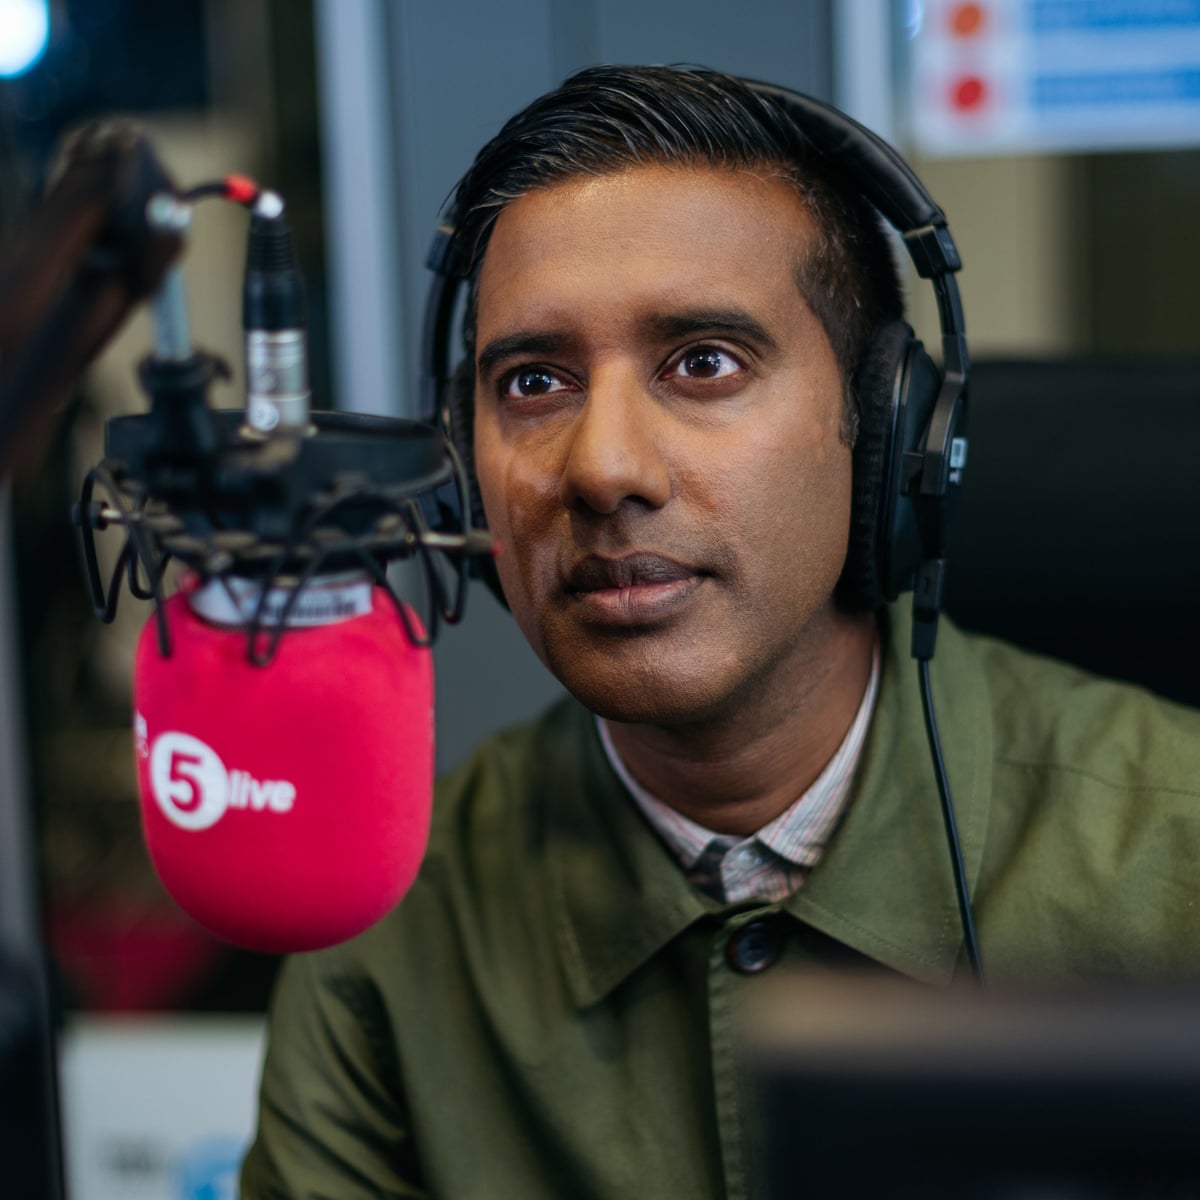 The week in radio and podcasts: Nihal Arthanayake; Drive; Iain Dale; 30  Animals That Made Us Smarter | Podcasts | The Guardian